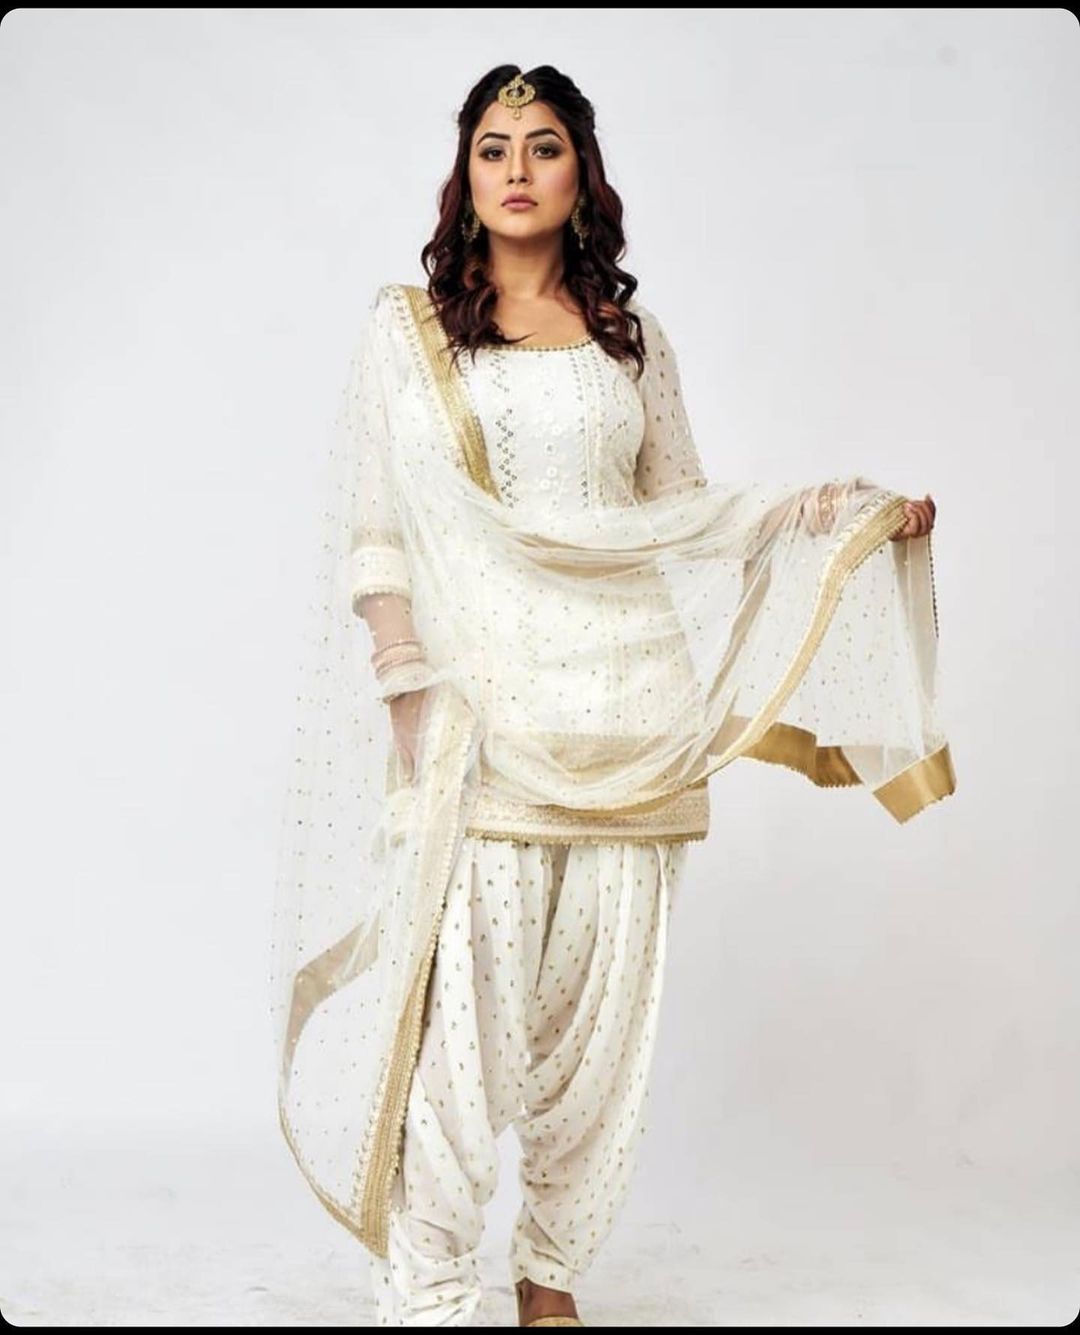 Shehnaaz Gill looks graceful in the white patiala suit. 